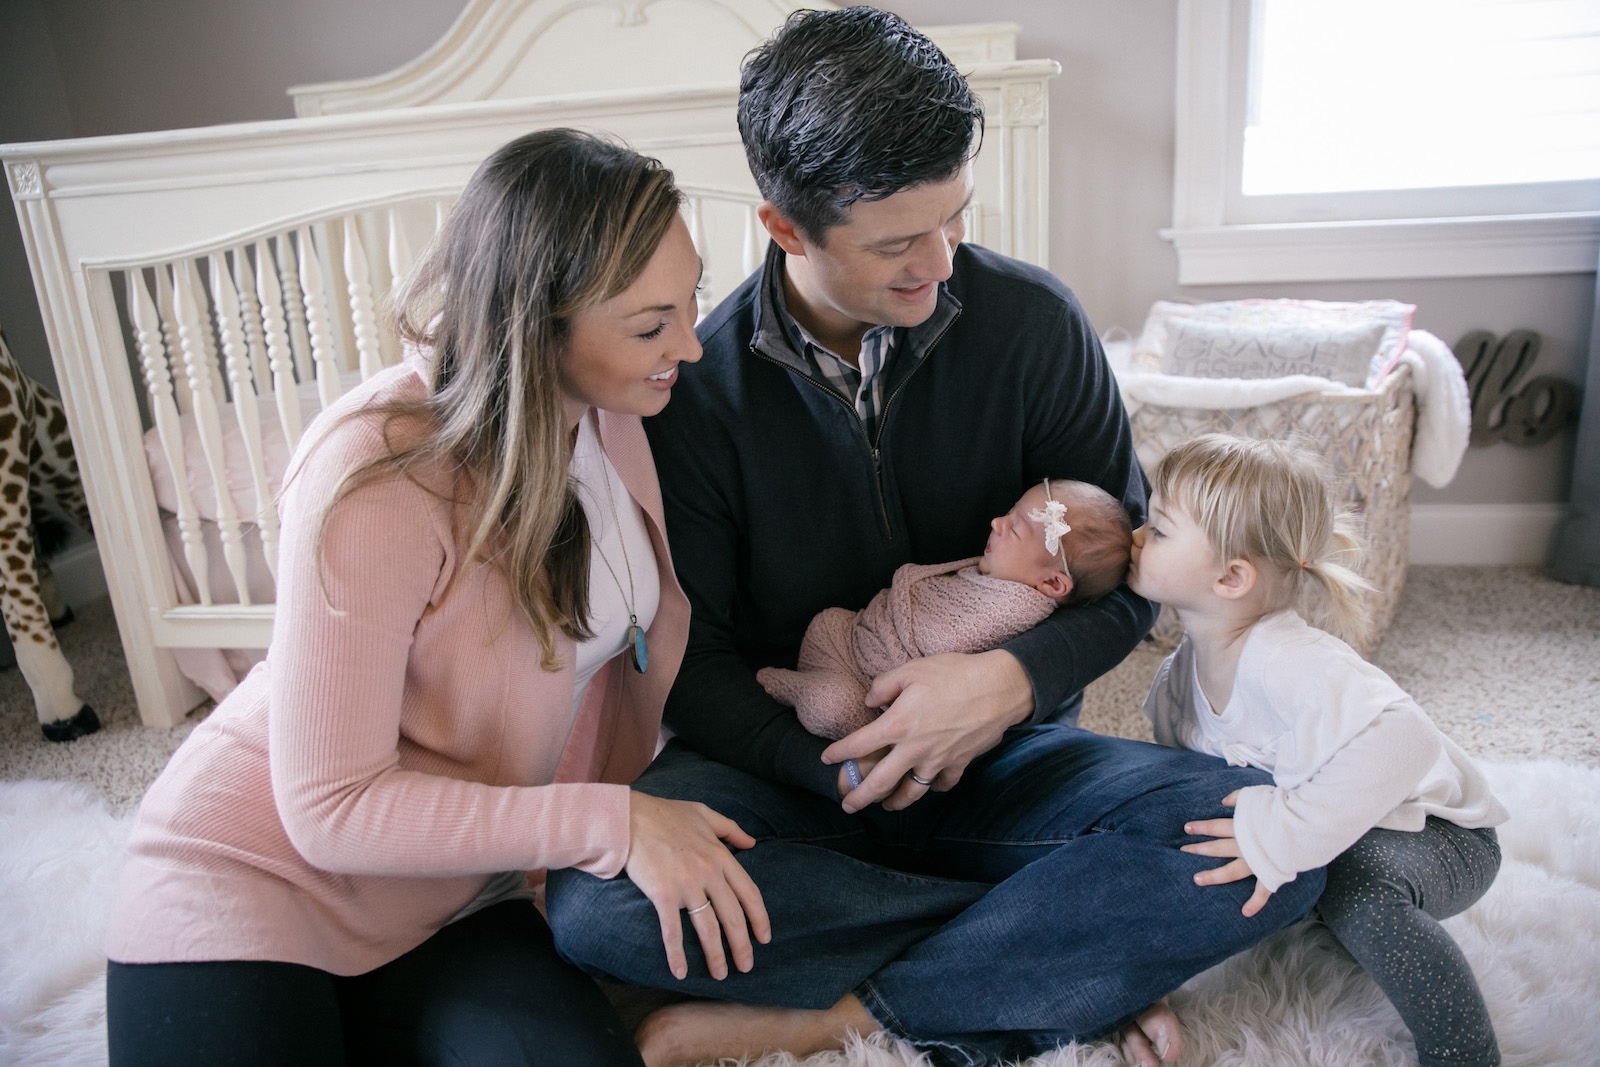 The Meibers’ Newborn + Family Photo Session from SheHeWe Family Photography